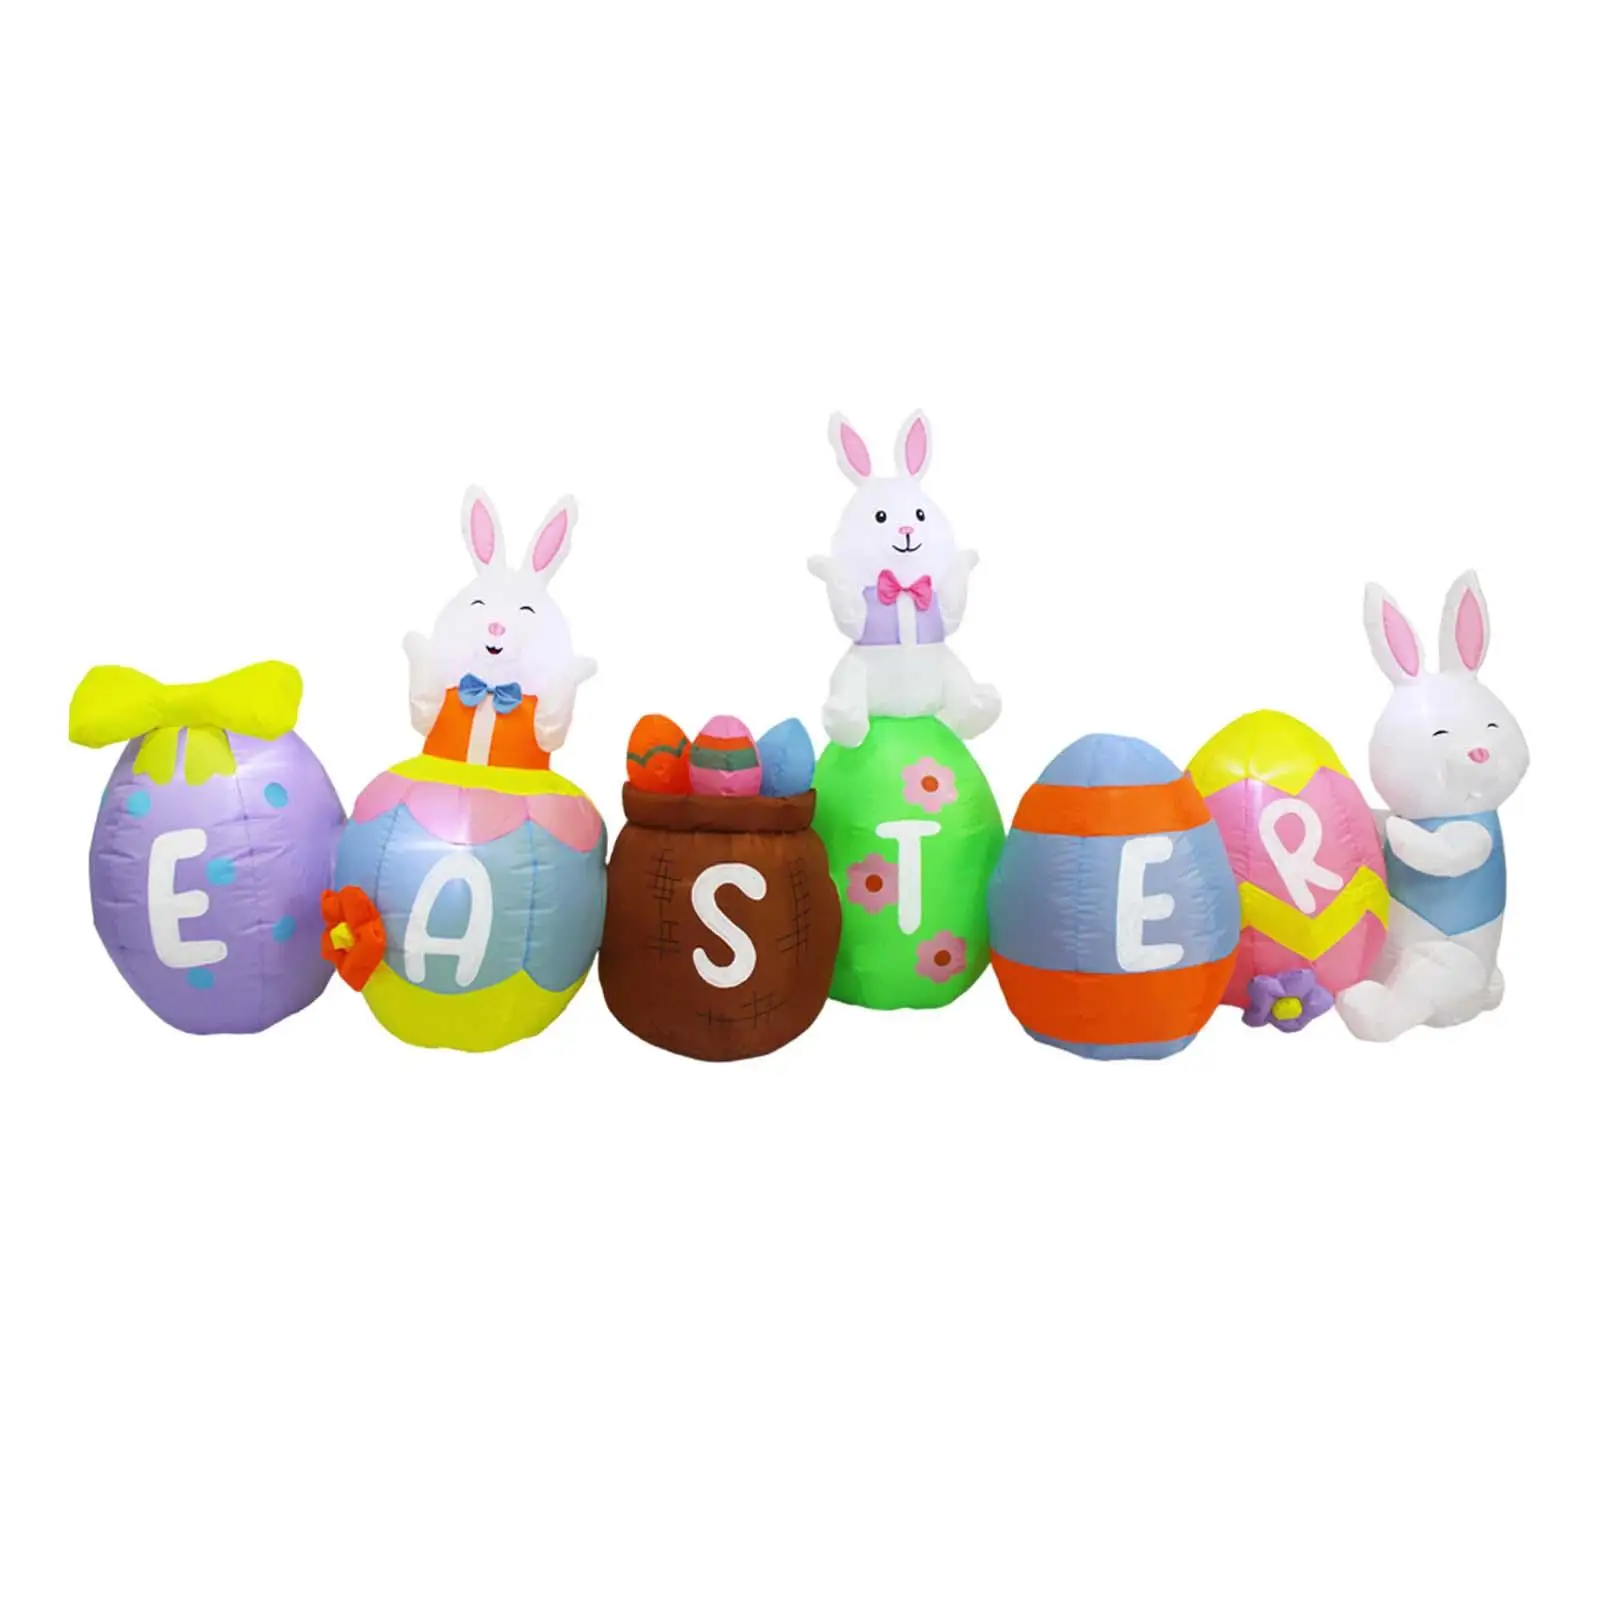 10ft Easter Inflatables Outdoor Decorations Giant for Holiday Garden Lawn